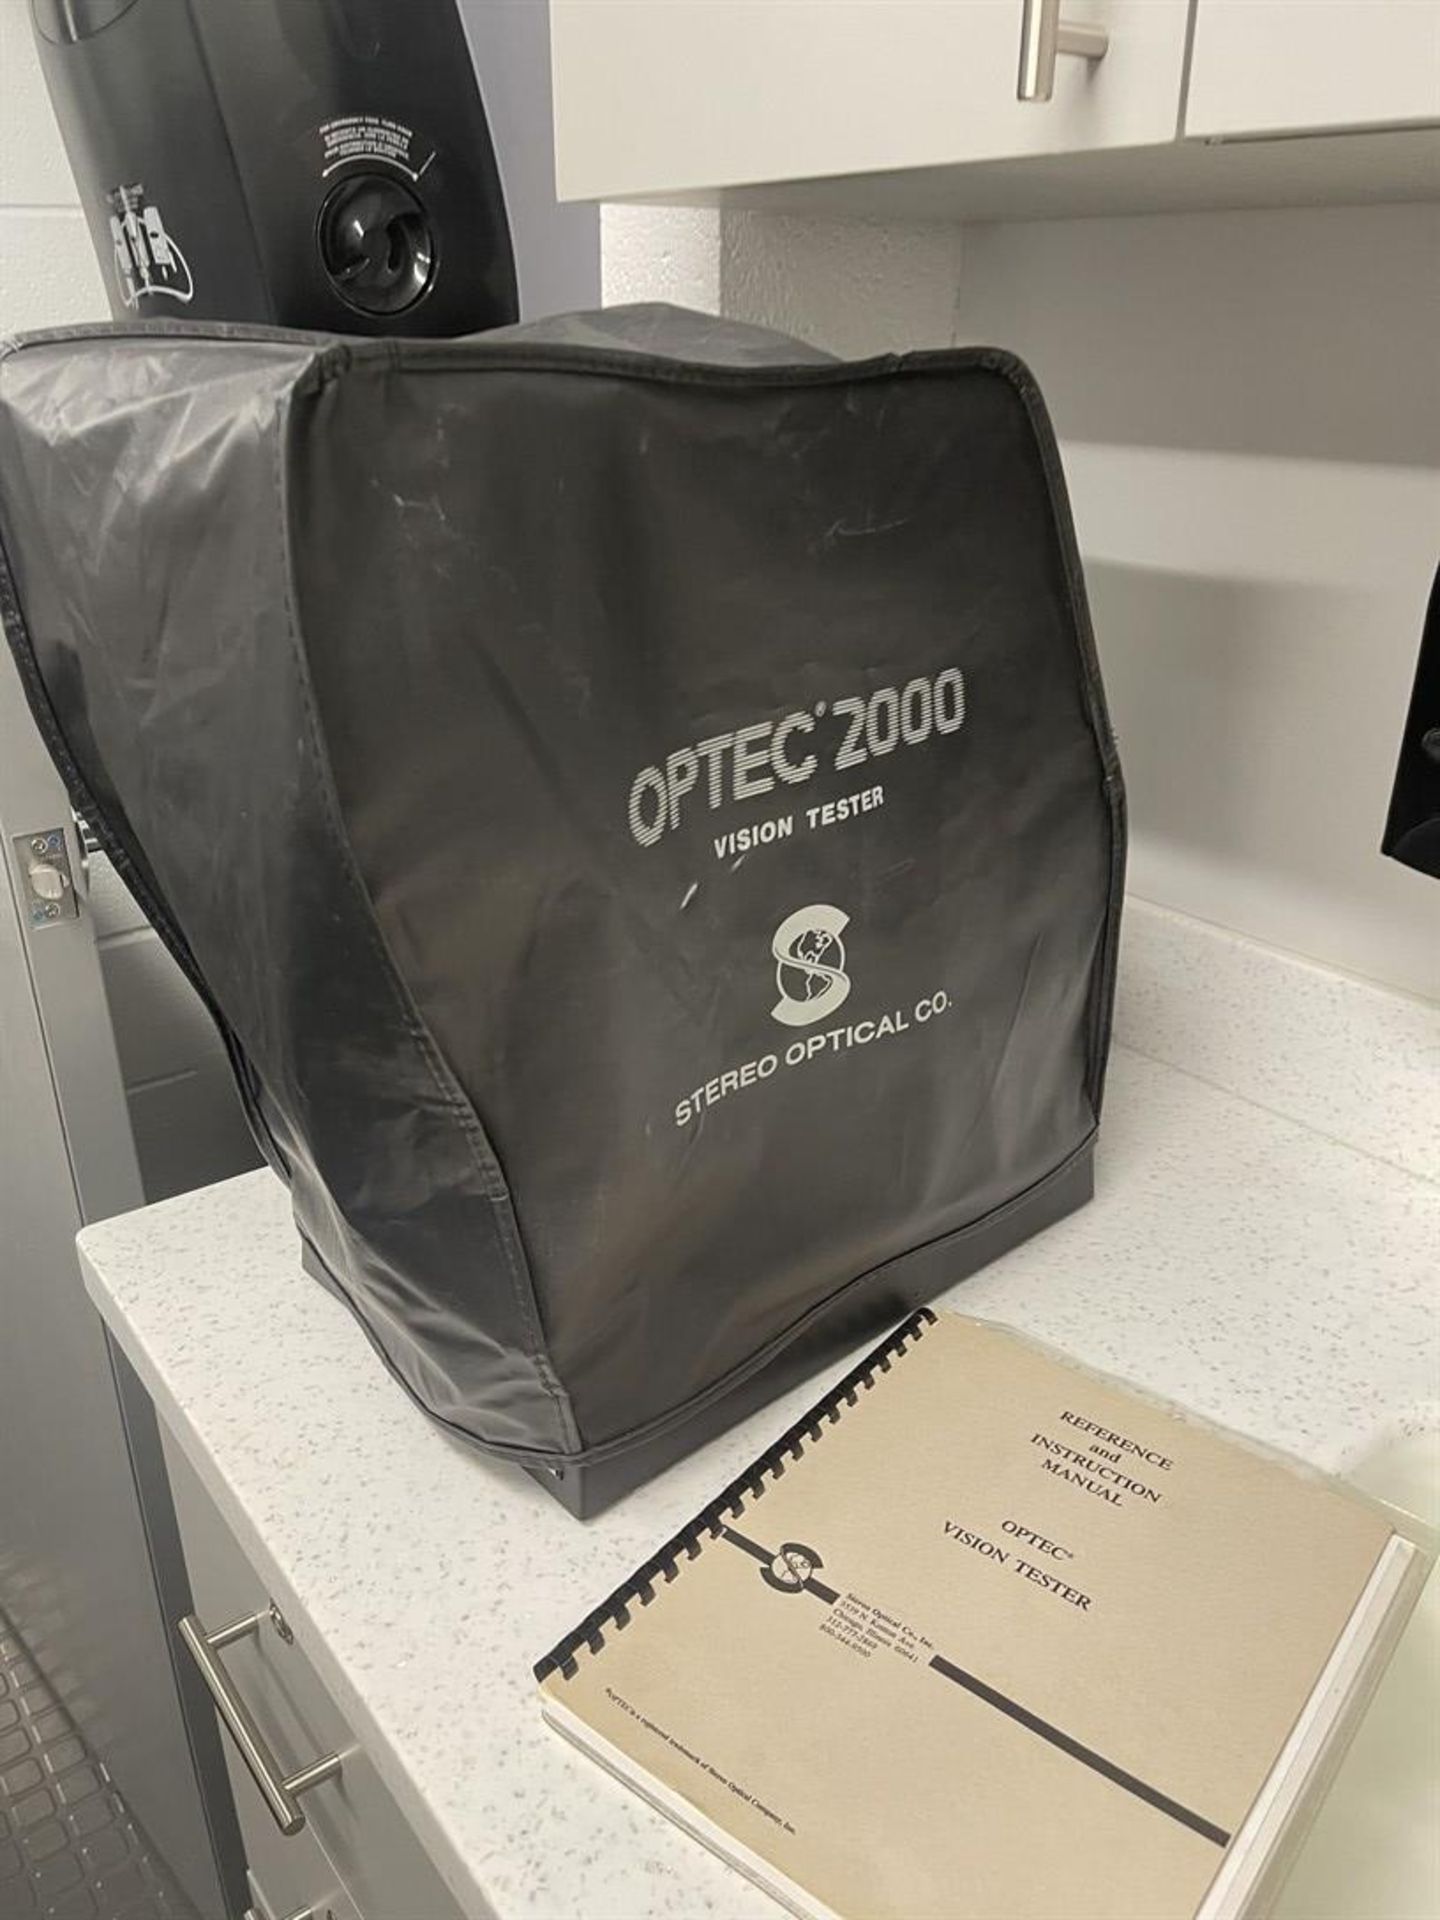 STEREO OPTICAL Optec 2000P Vision Tester - Image 5 of 5